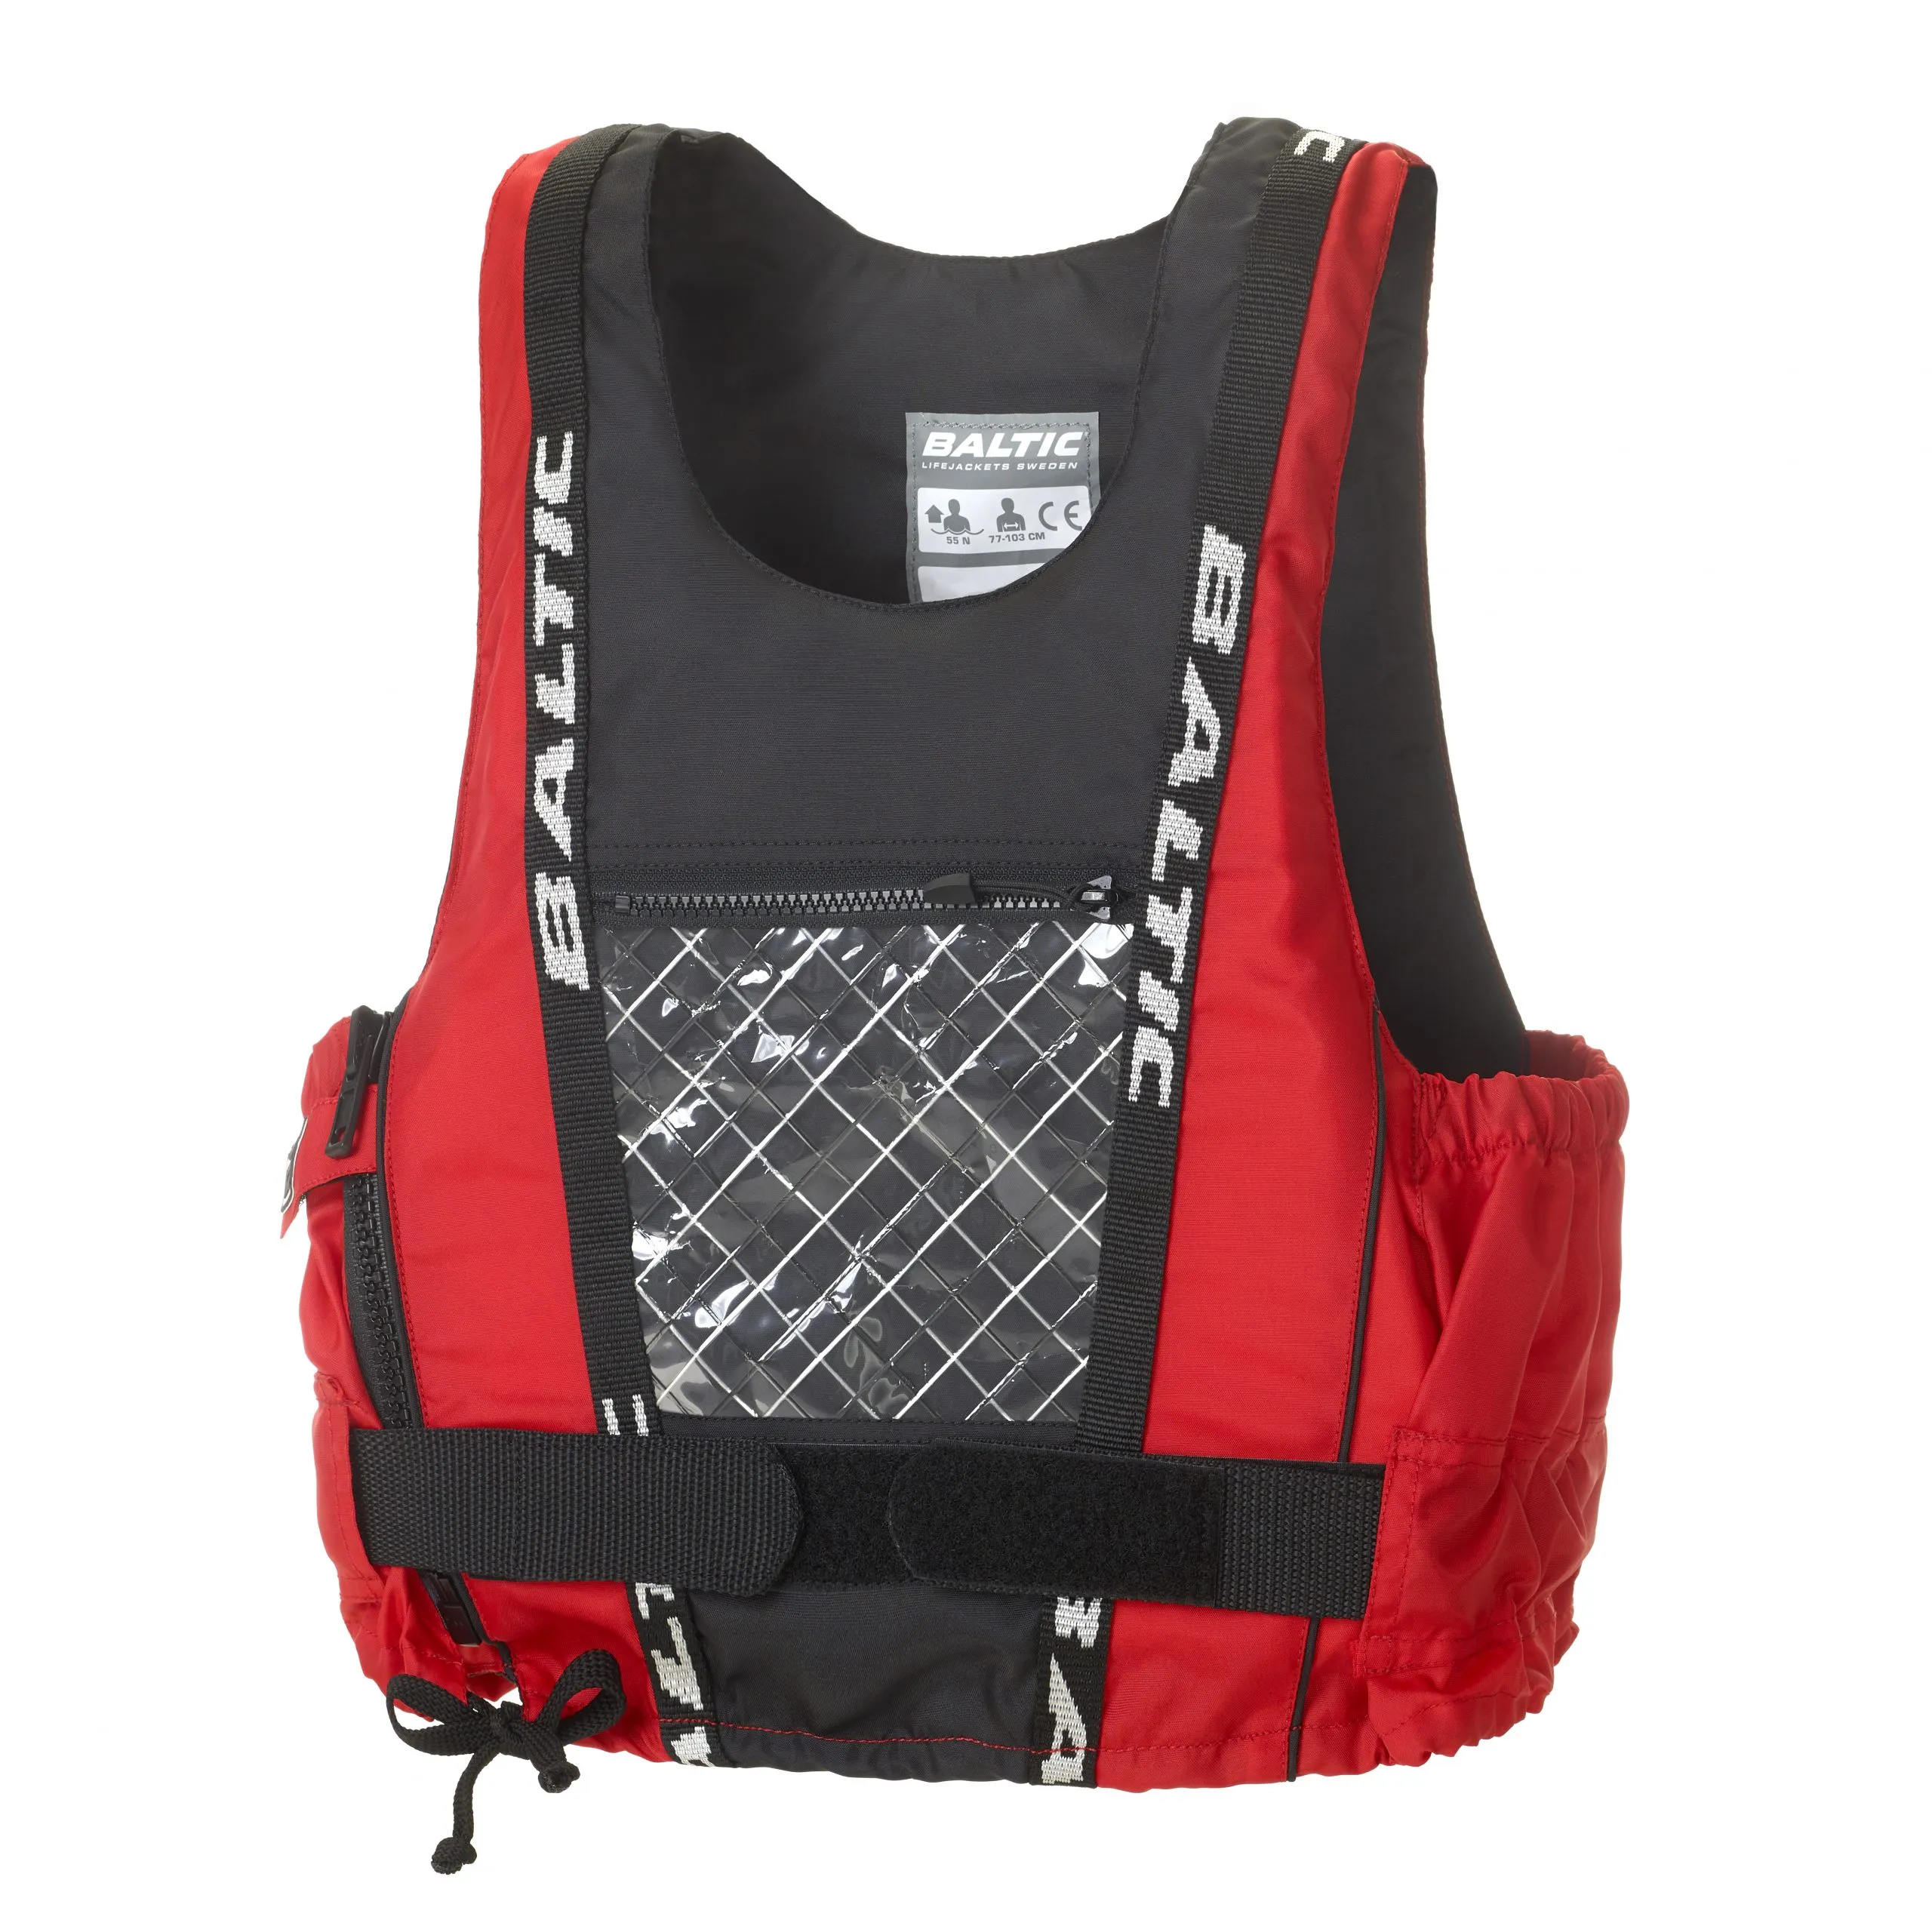 Baltic Dinghy Pro Buoyancy Aid Adult - Red/Black